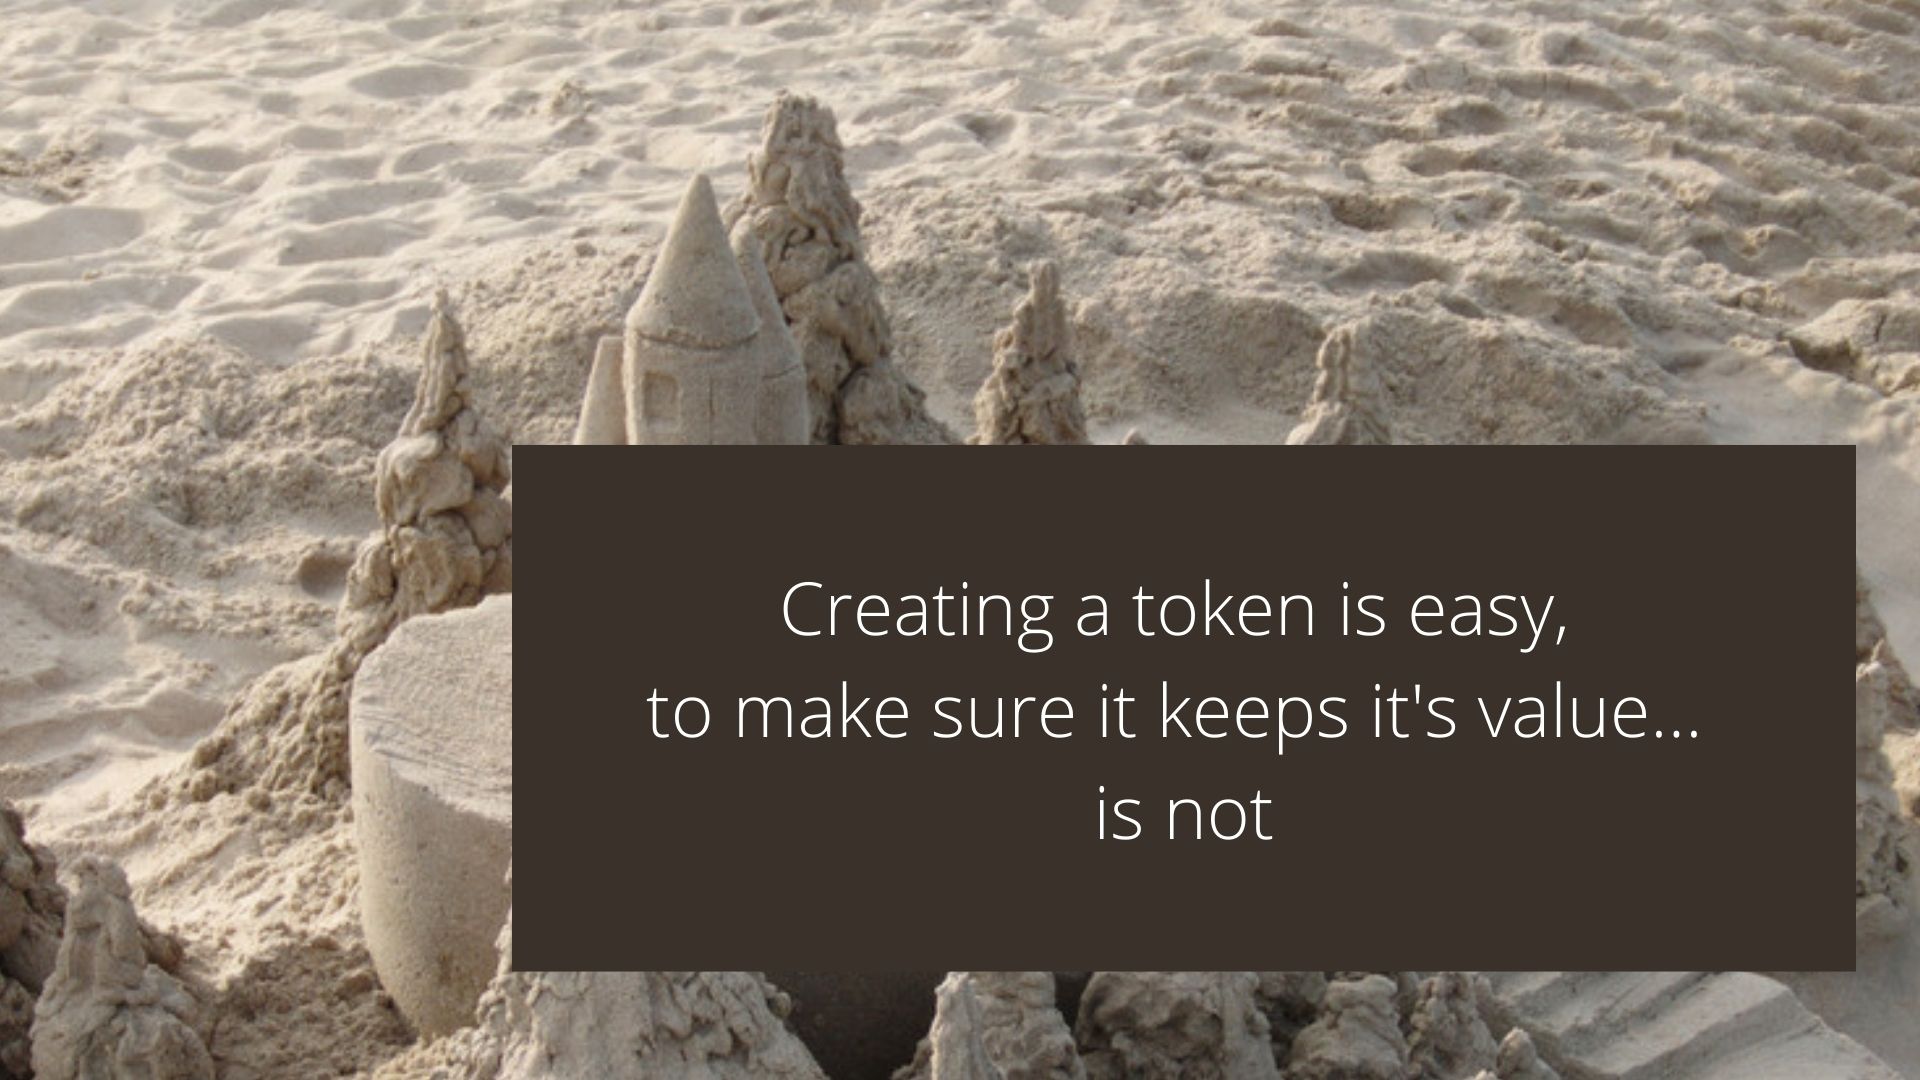 Creating a token is easy, to make sure it keeps it's value... is not.jpg